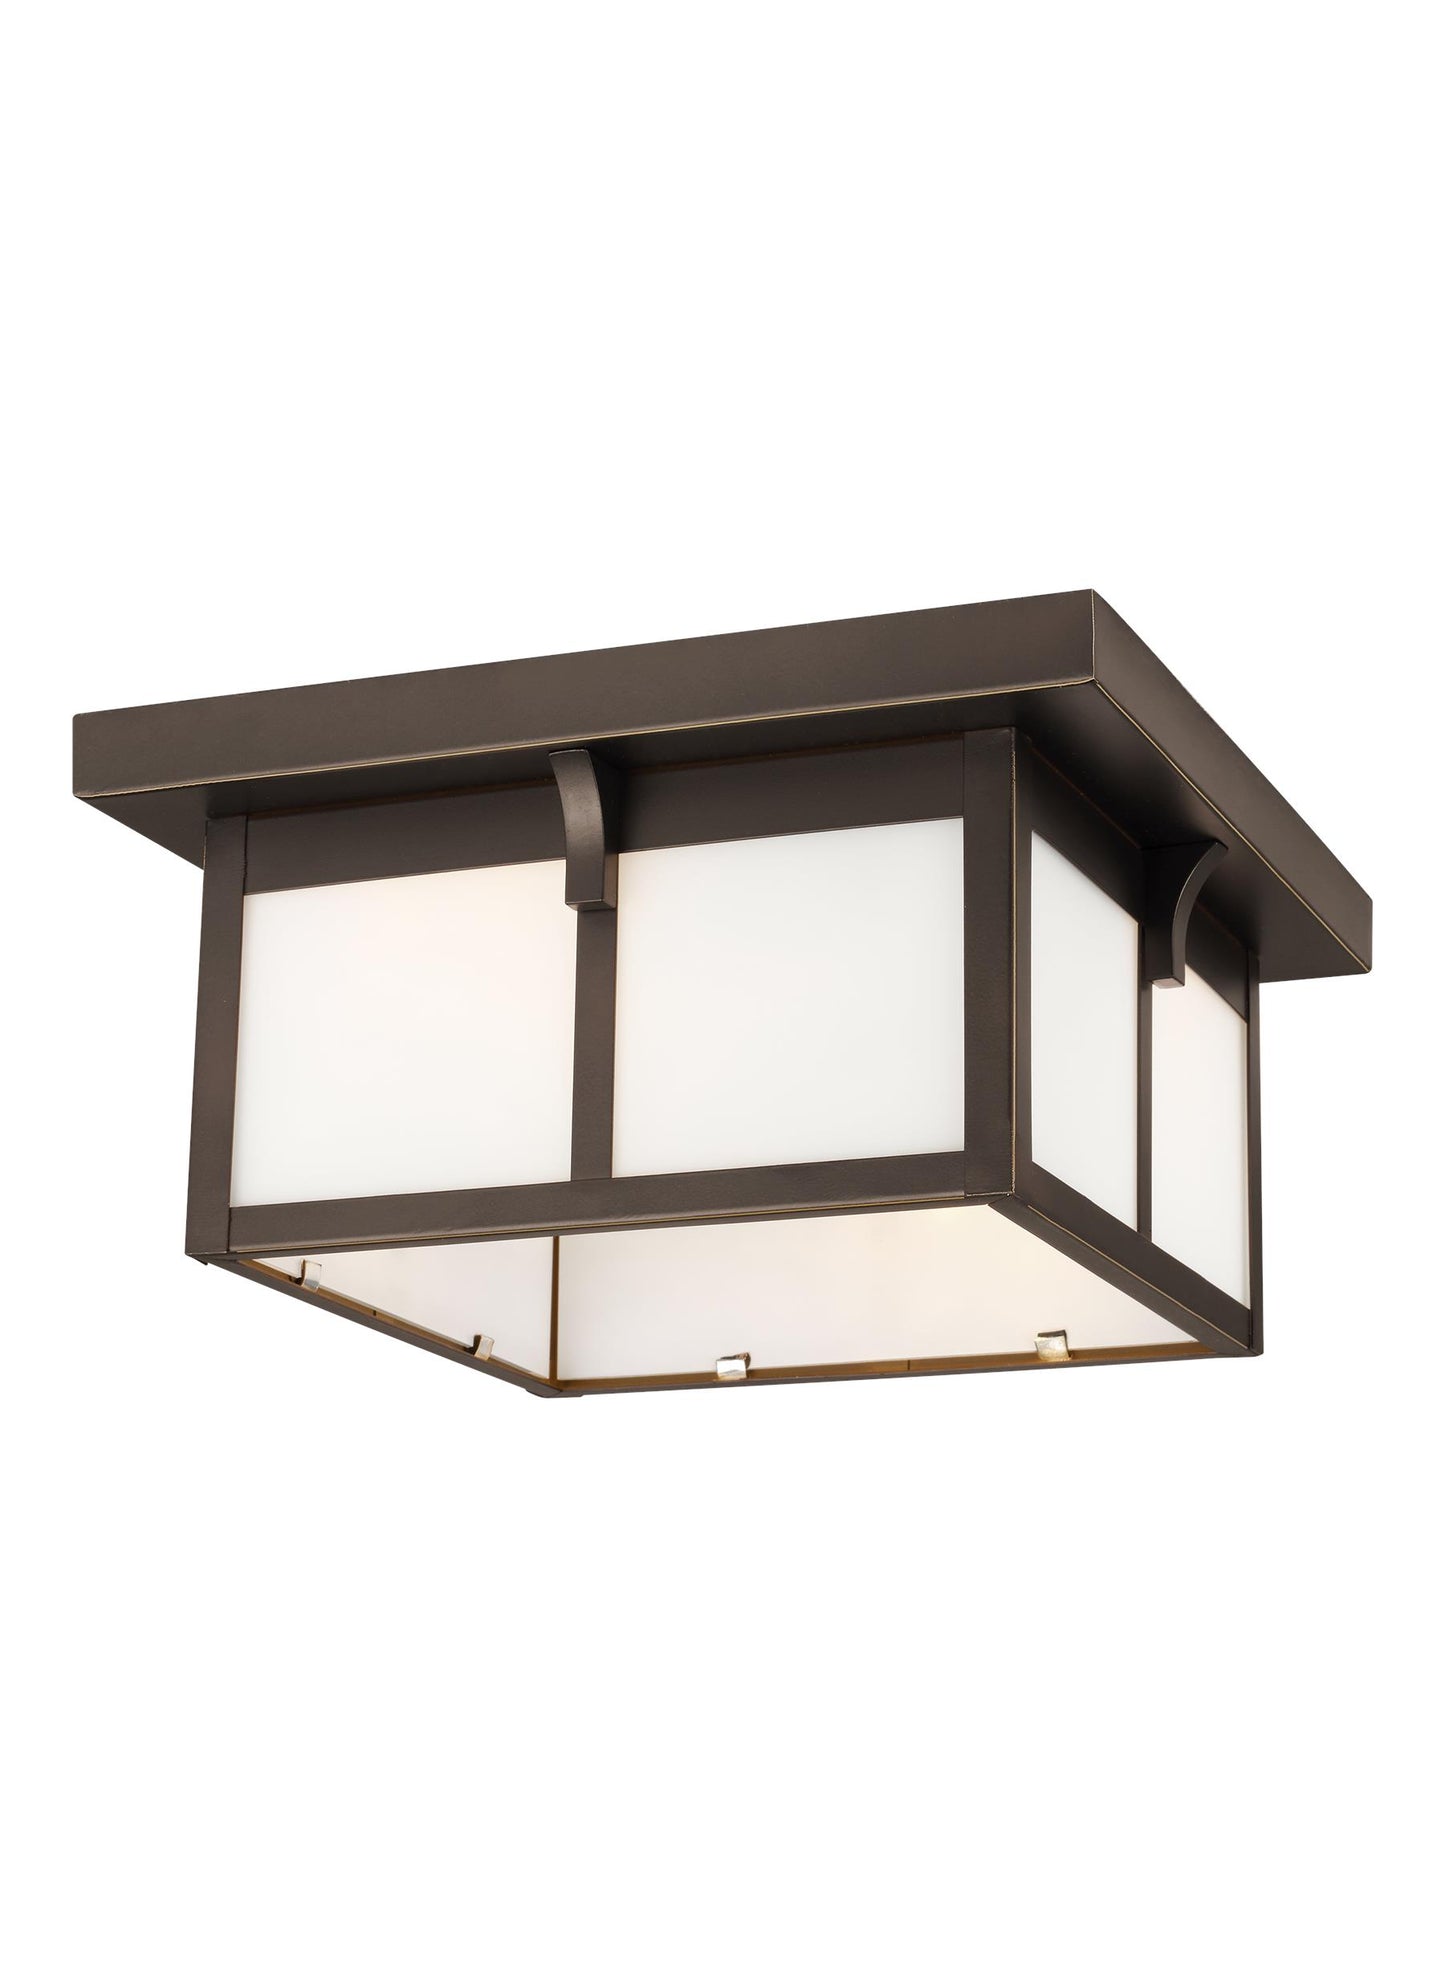 Tomek modern 2-light outdoor exterior ceiling flush mount in antique bronze finish with etched white glass panels